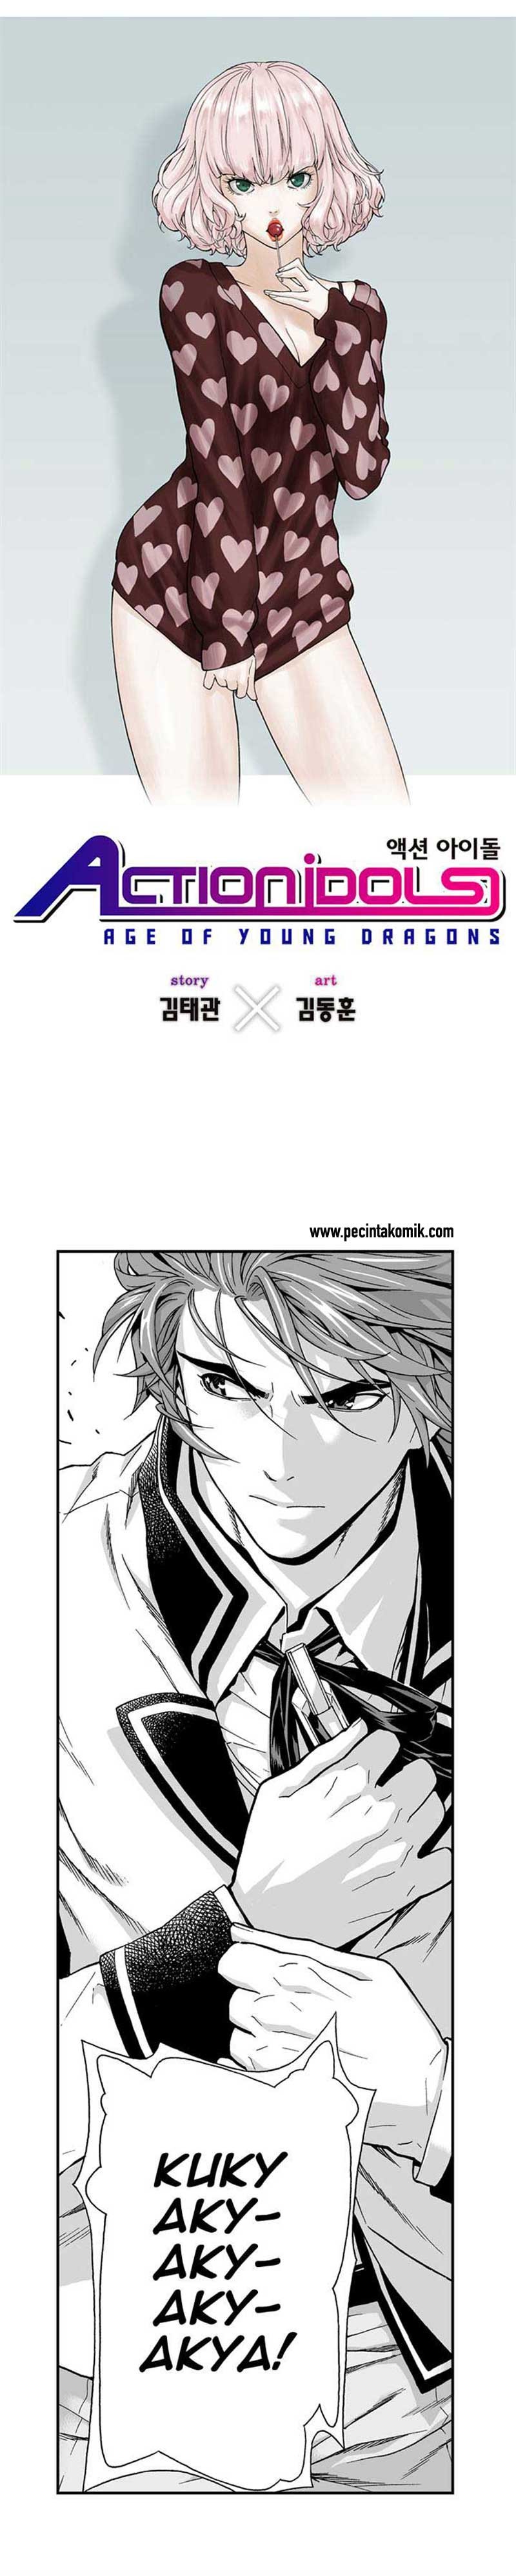 Action Idols – Age of Young Dragons Chapter 9